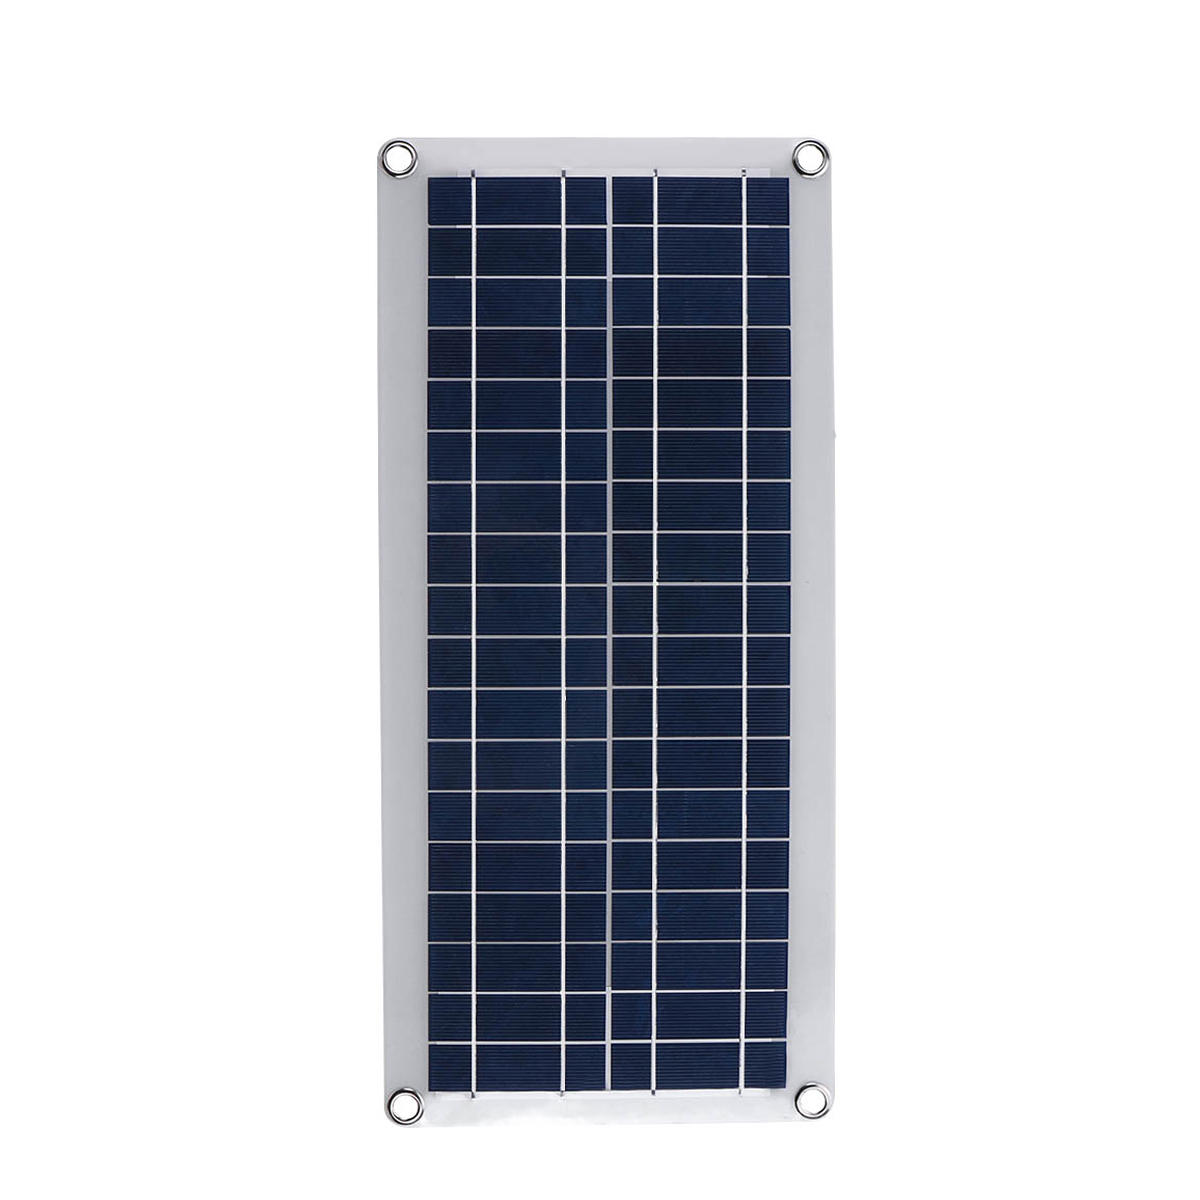 12V 30W IP65 Waterproof Polycrystalline PET Solar Panel with 4xSuckers+Cables for 5V USB Output